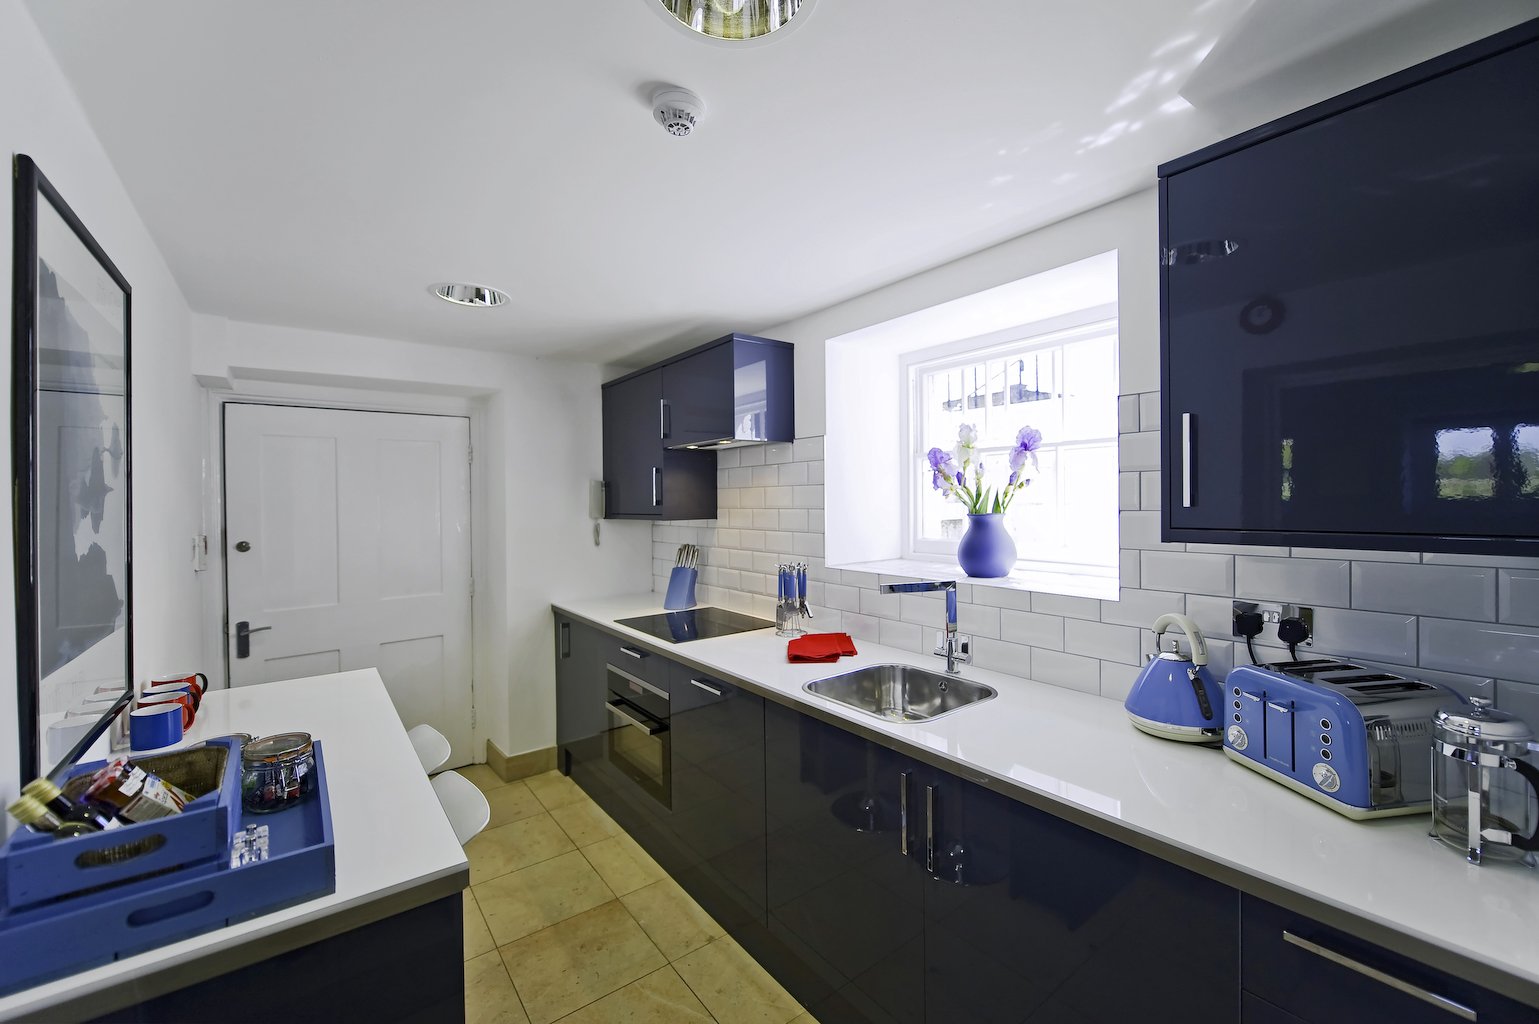 Kingston-Accommodation-West-London-available-from-today!-Book-luxury-Serviced-Apartments-in-Kingston-upon-Thames-with-Urban-Stay-now!-All-bills-included!!-+44-(0)-208-691-3920